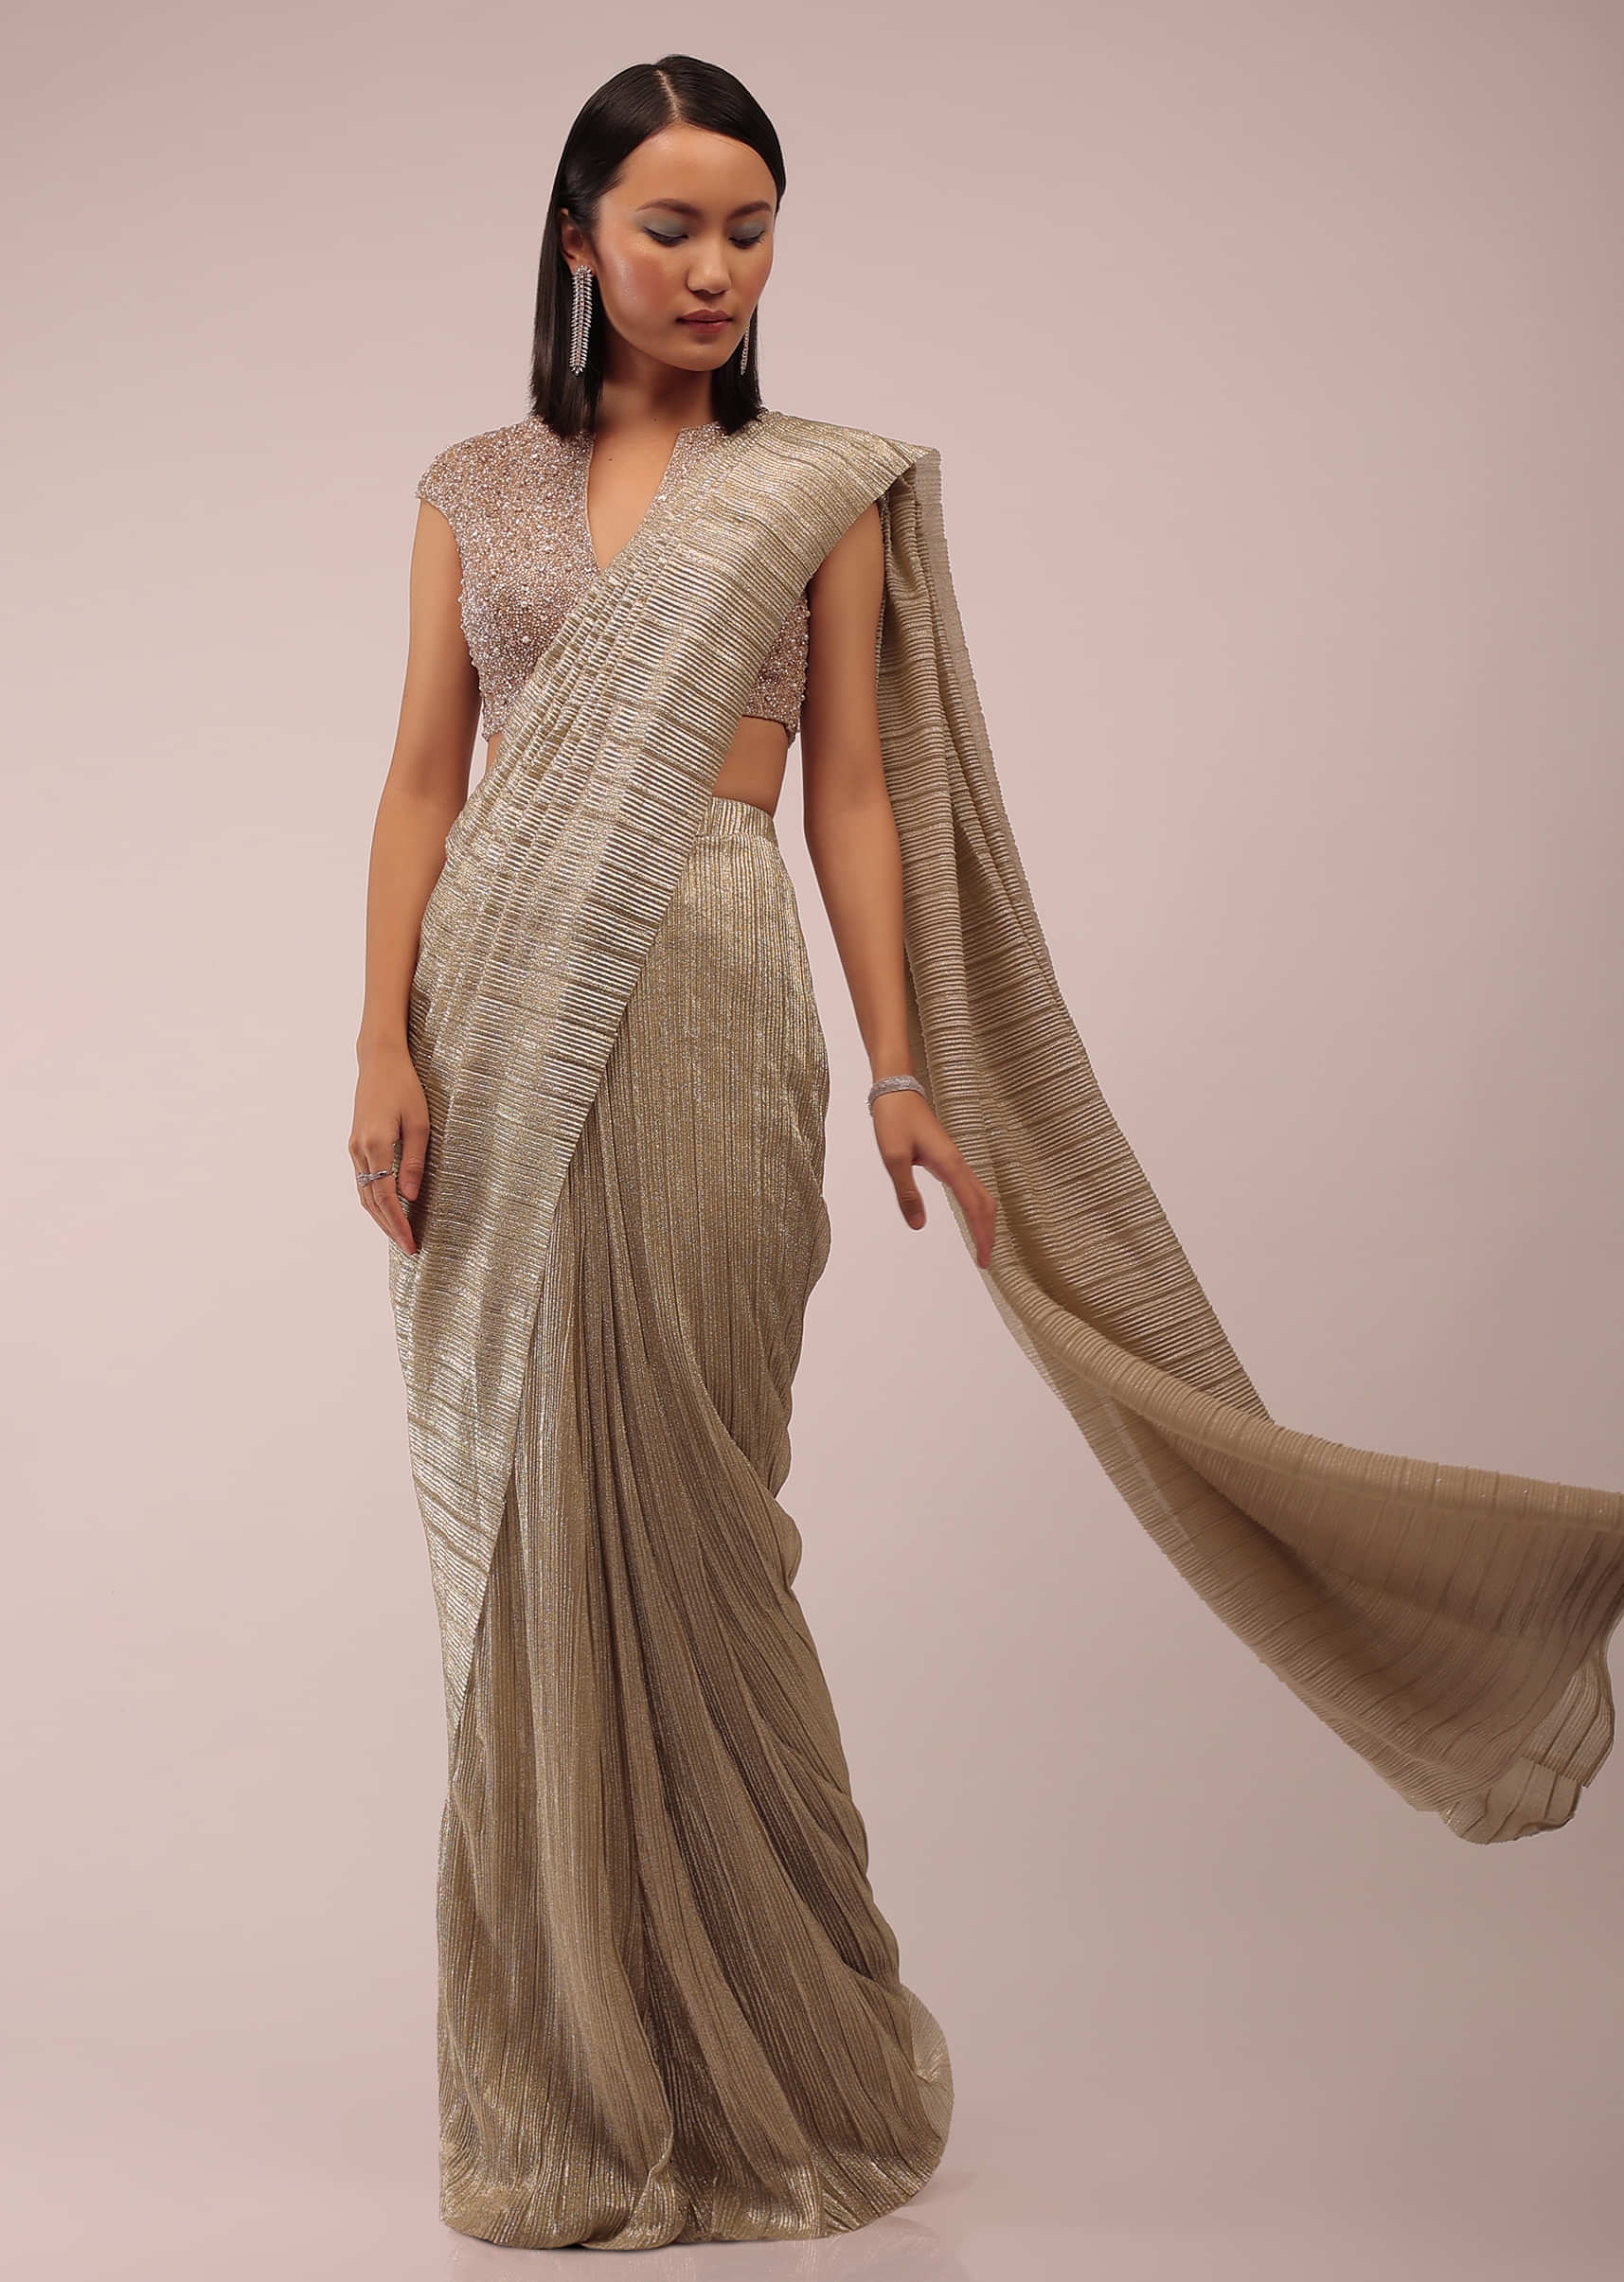 Pre Stitched Saree Online  Buy Readymade Saree Collections